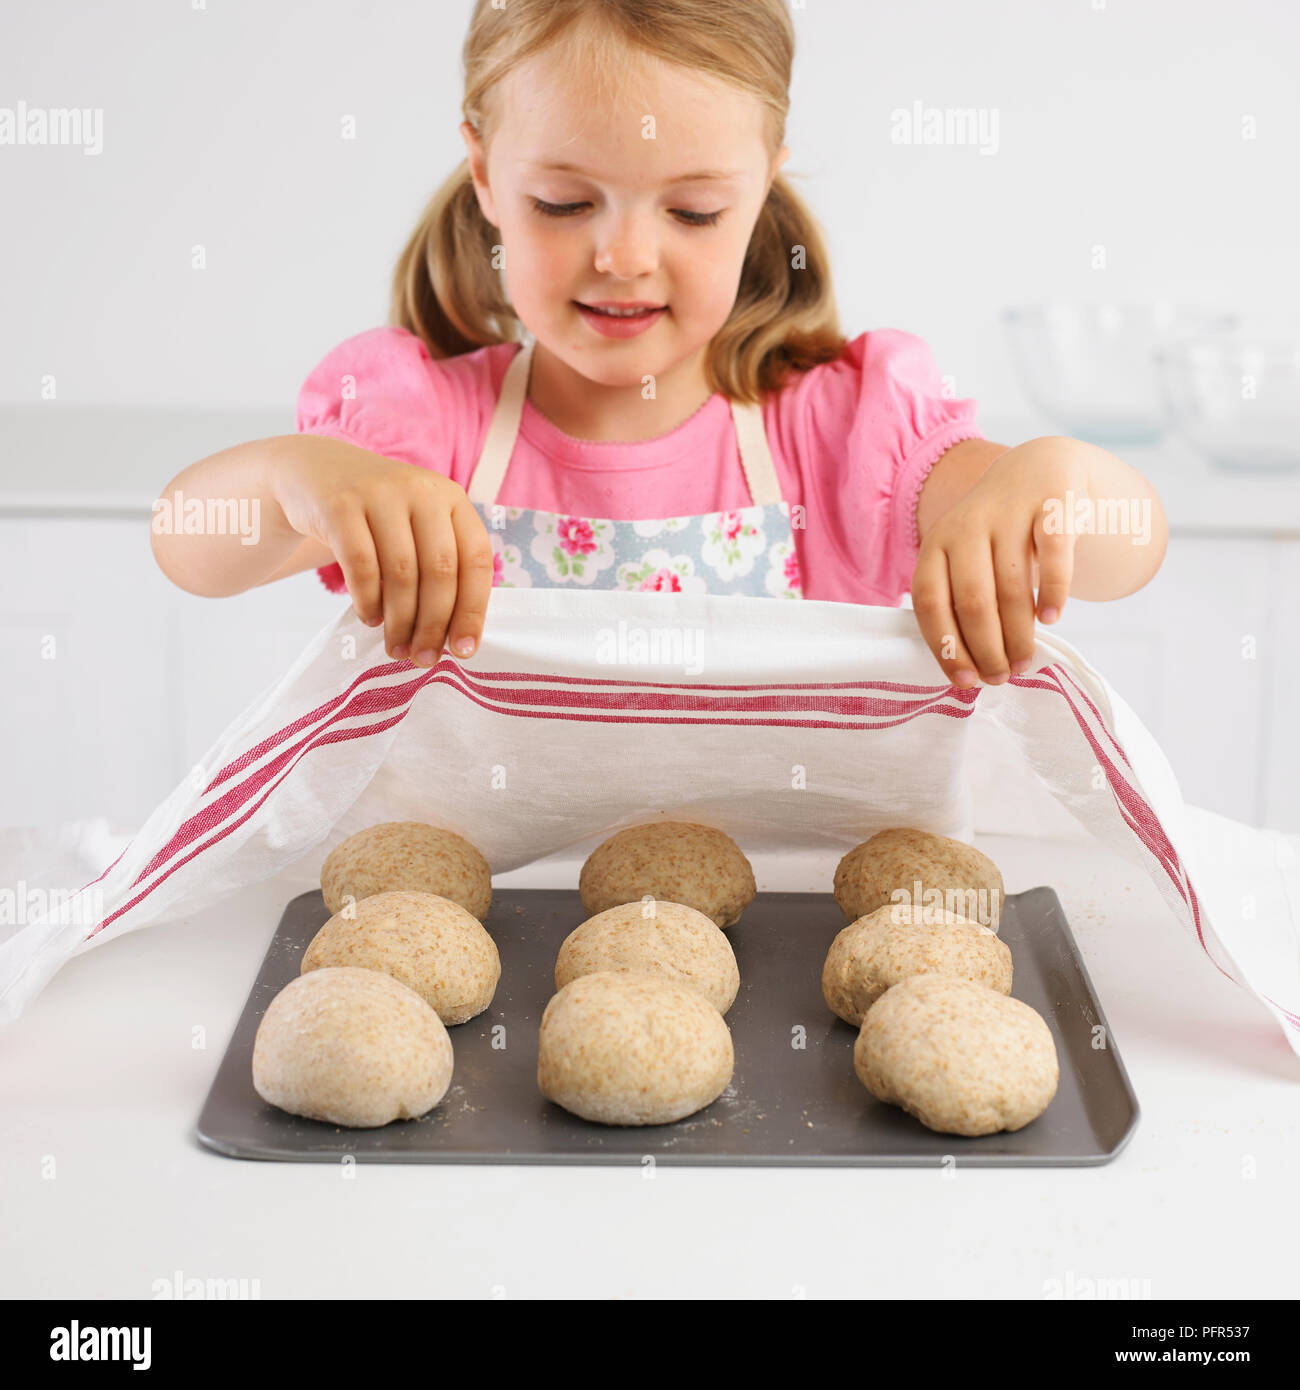 Girl covering tray of uncooked bread rolls with a tea towel, 5 years Stock Photo